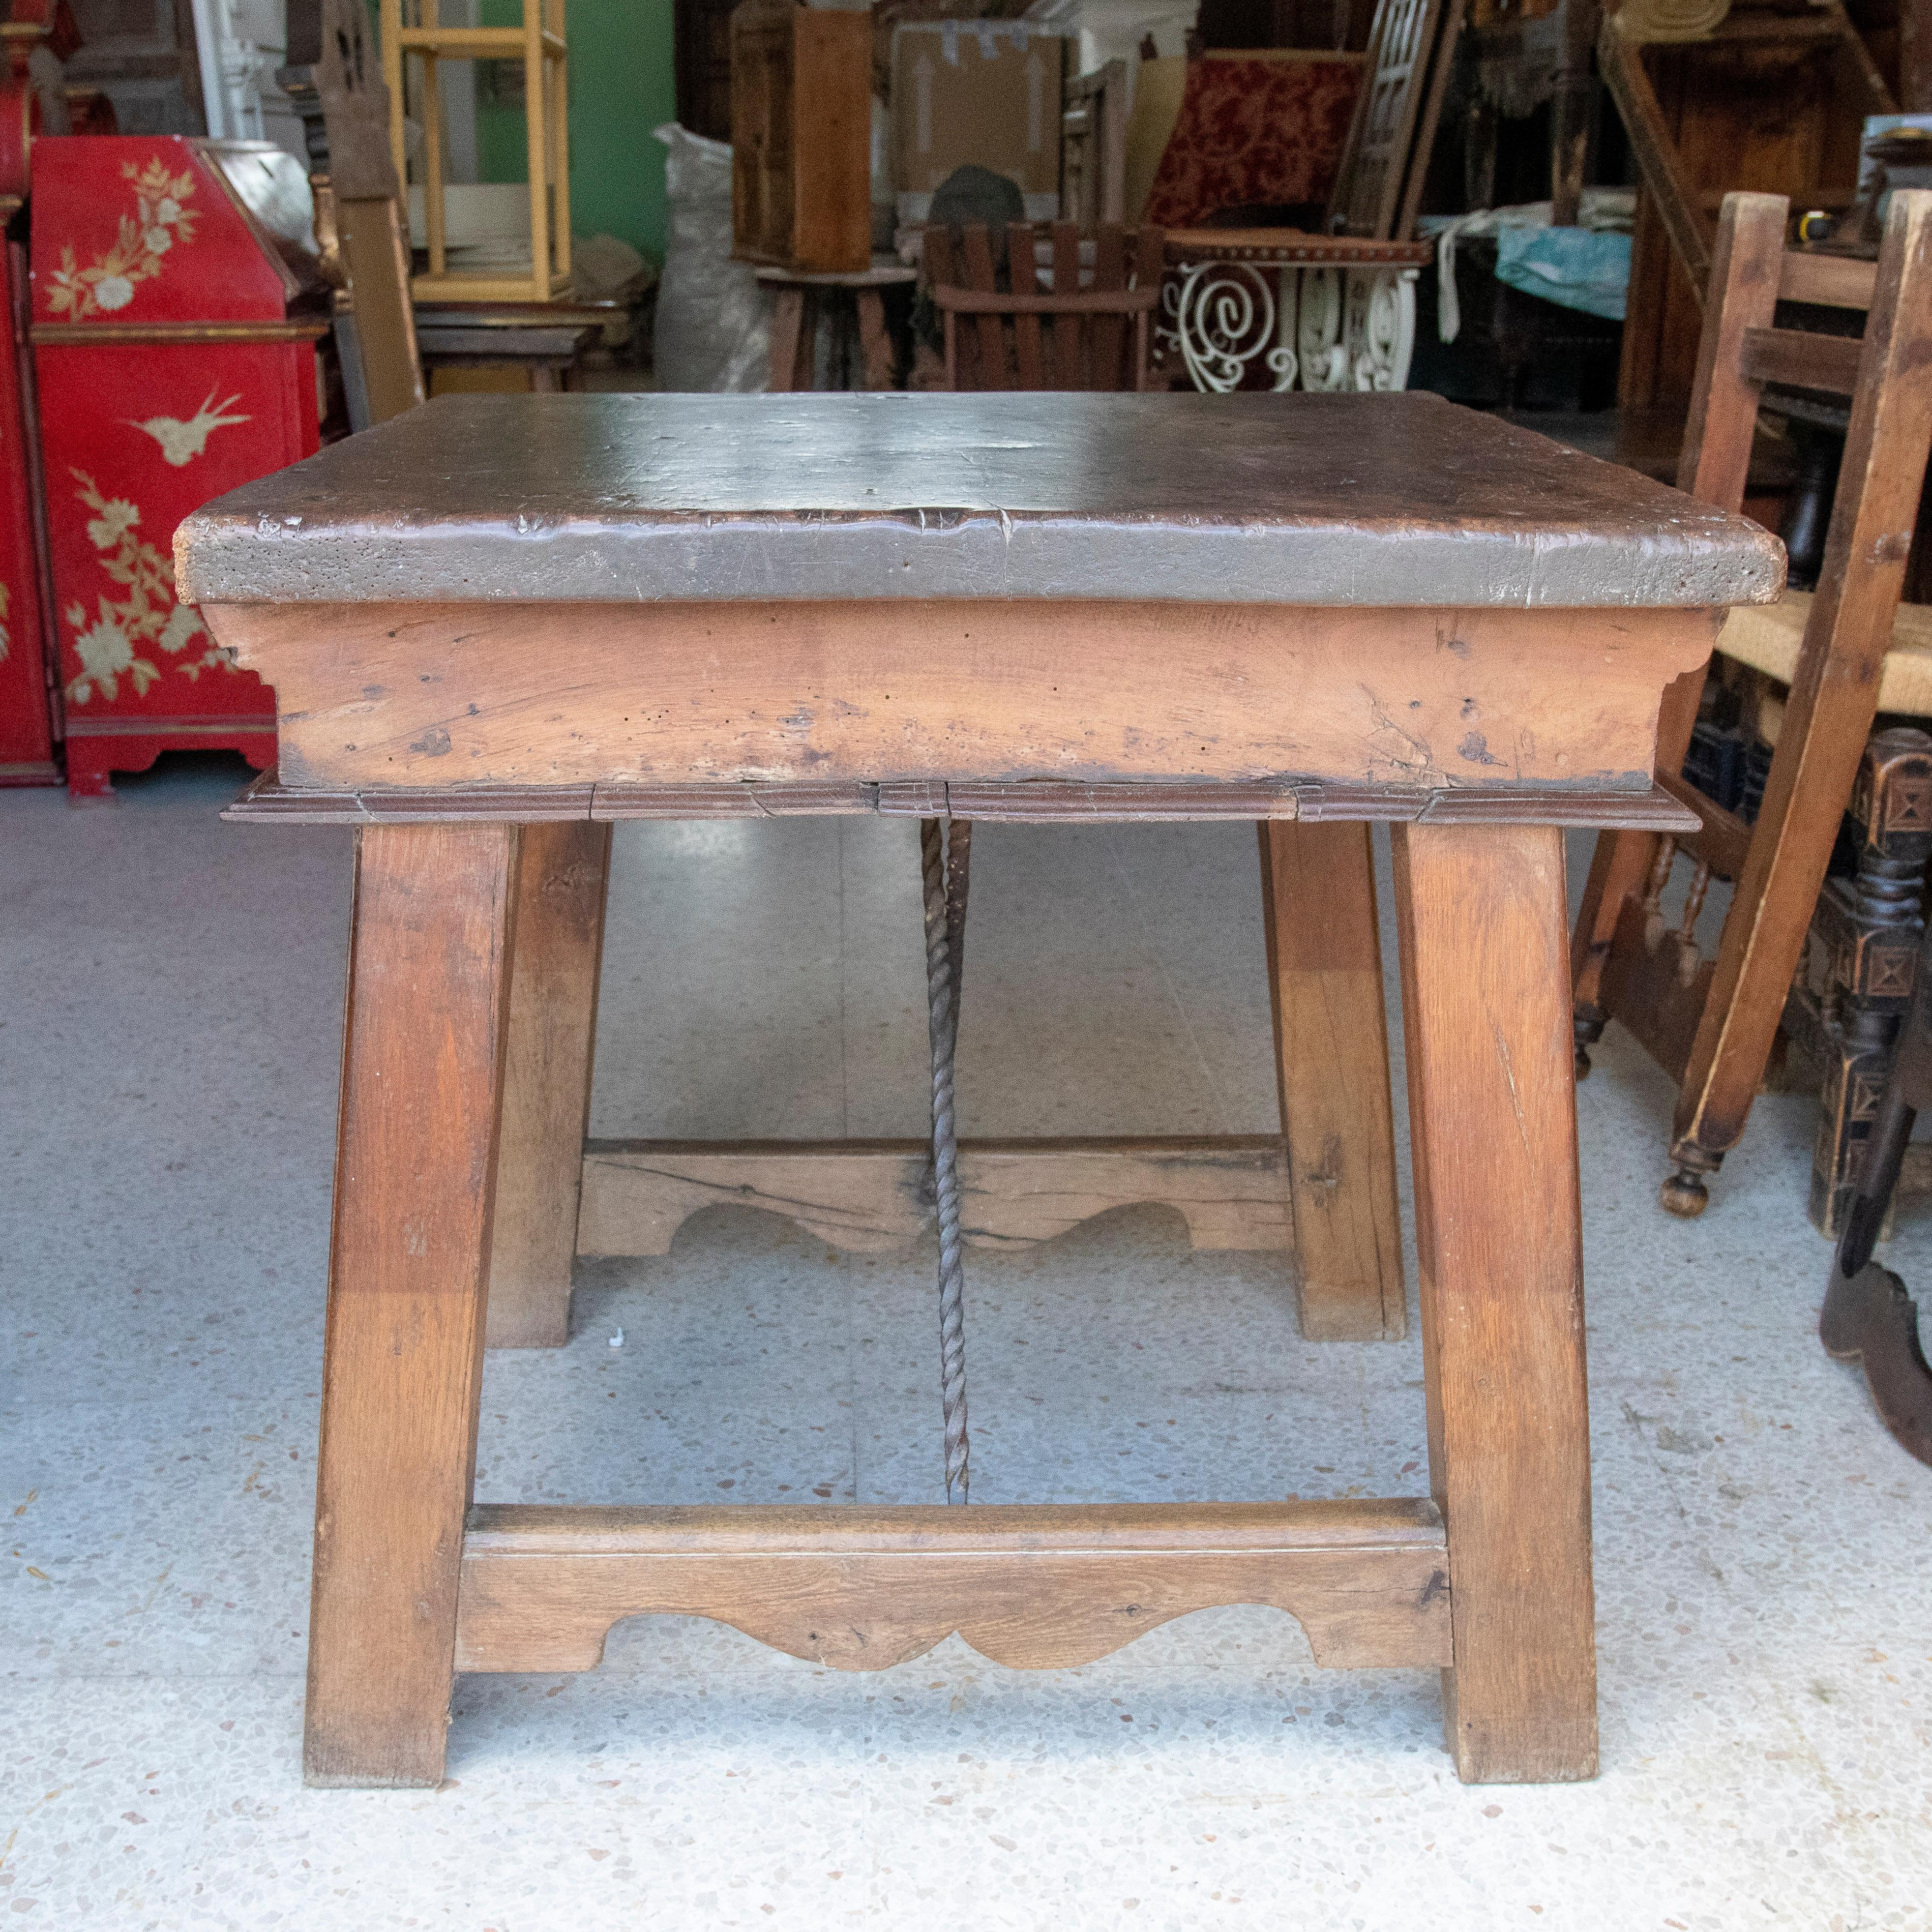 18th century Spanish wooden side table with drawer.